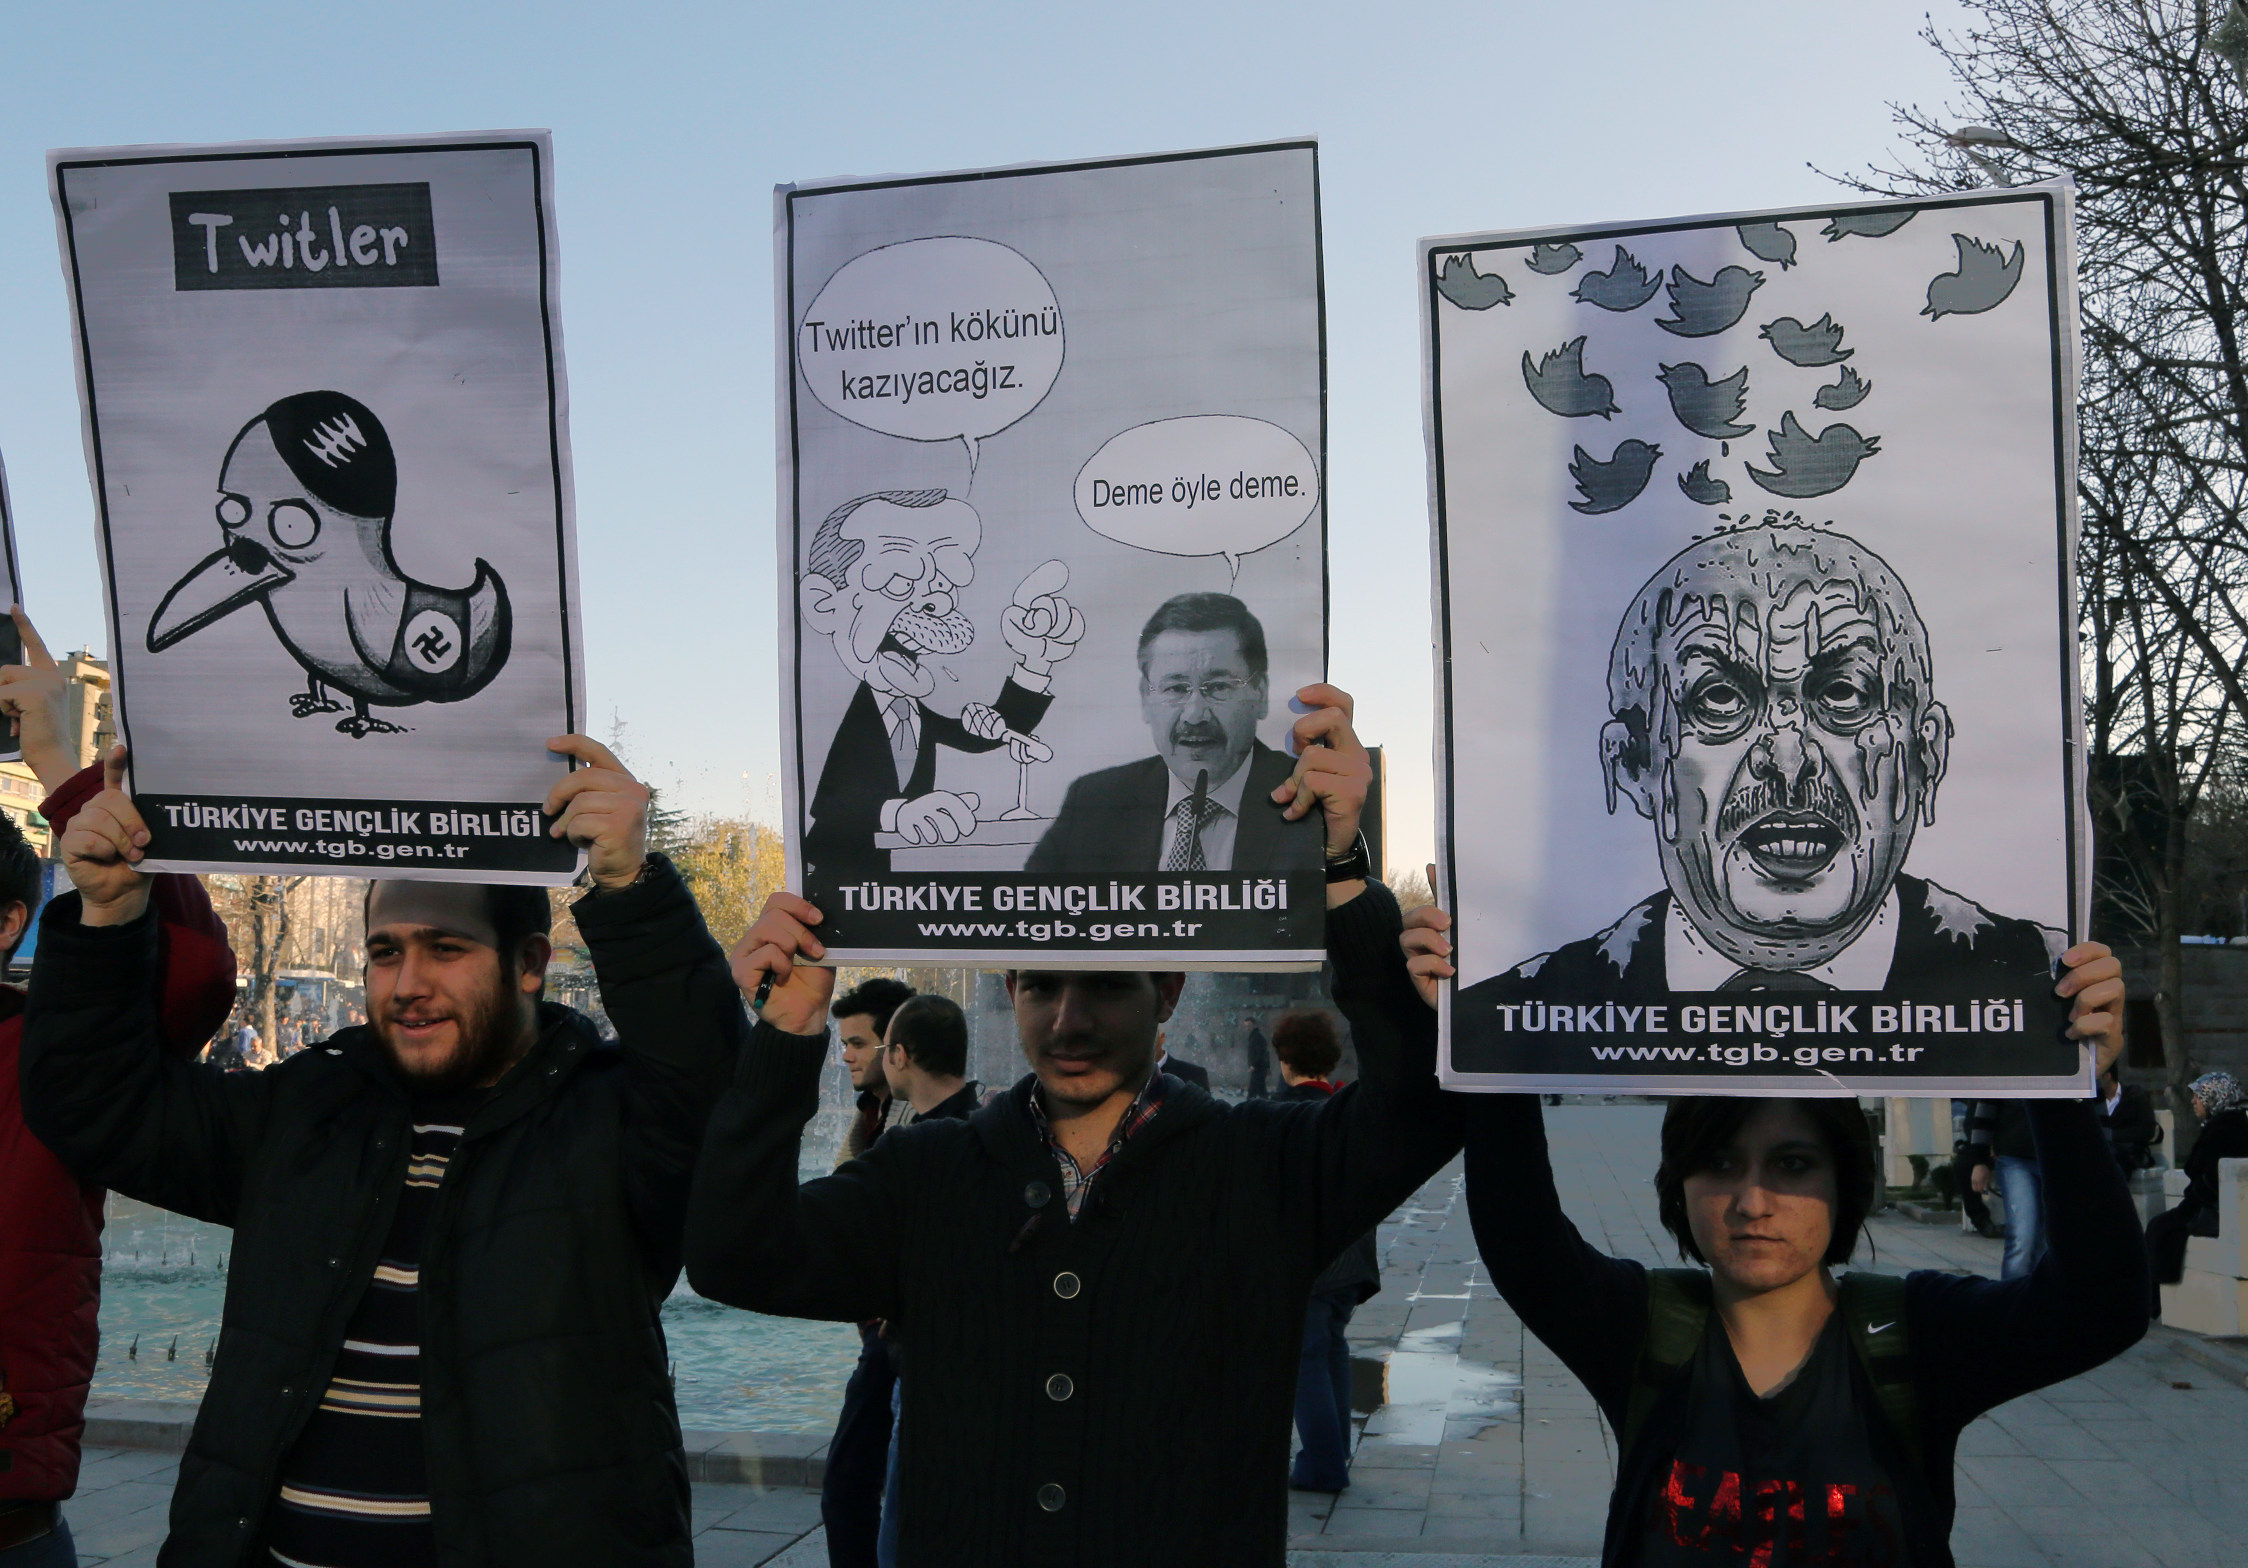 Members of the Turkish Youth Union hold cartoons depicting Turkey's Prime Minister Recep Tayyip Erdogan during a protest against a ban on Twitter in Ankara, Turkey on Friday. Photo: AP 